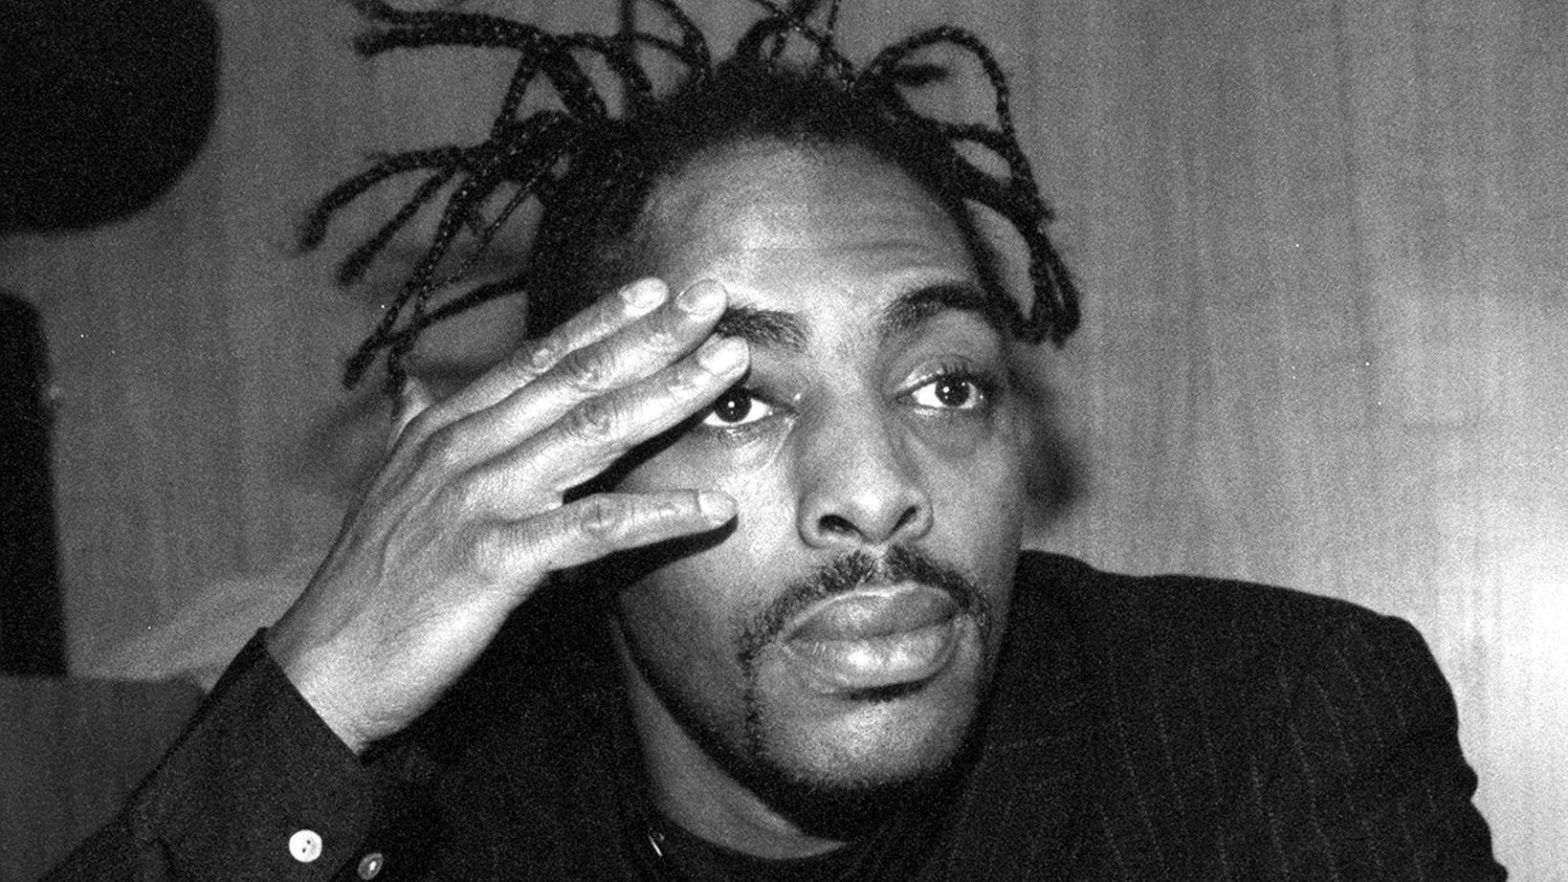 Coolio with braids and touching his eyebrow